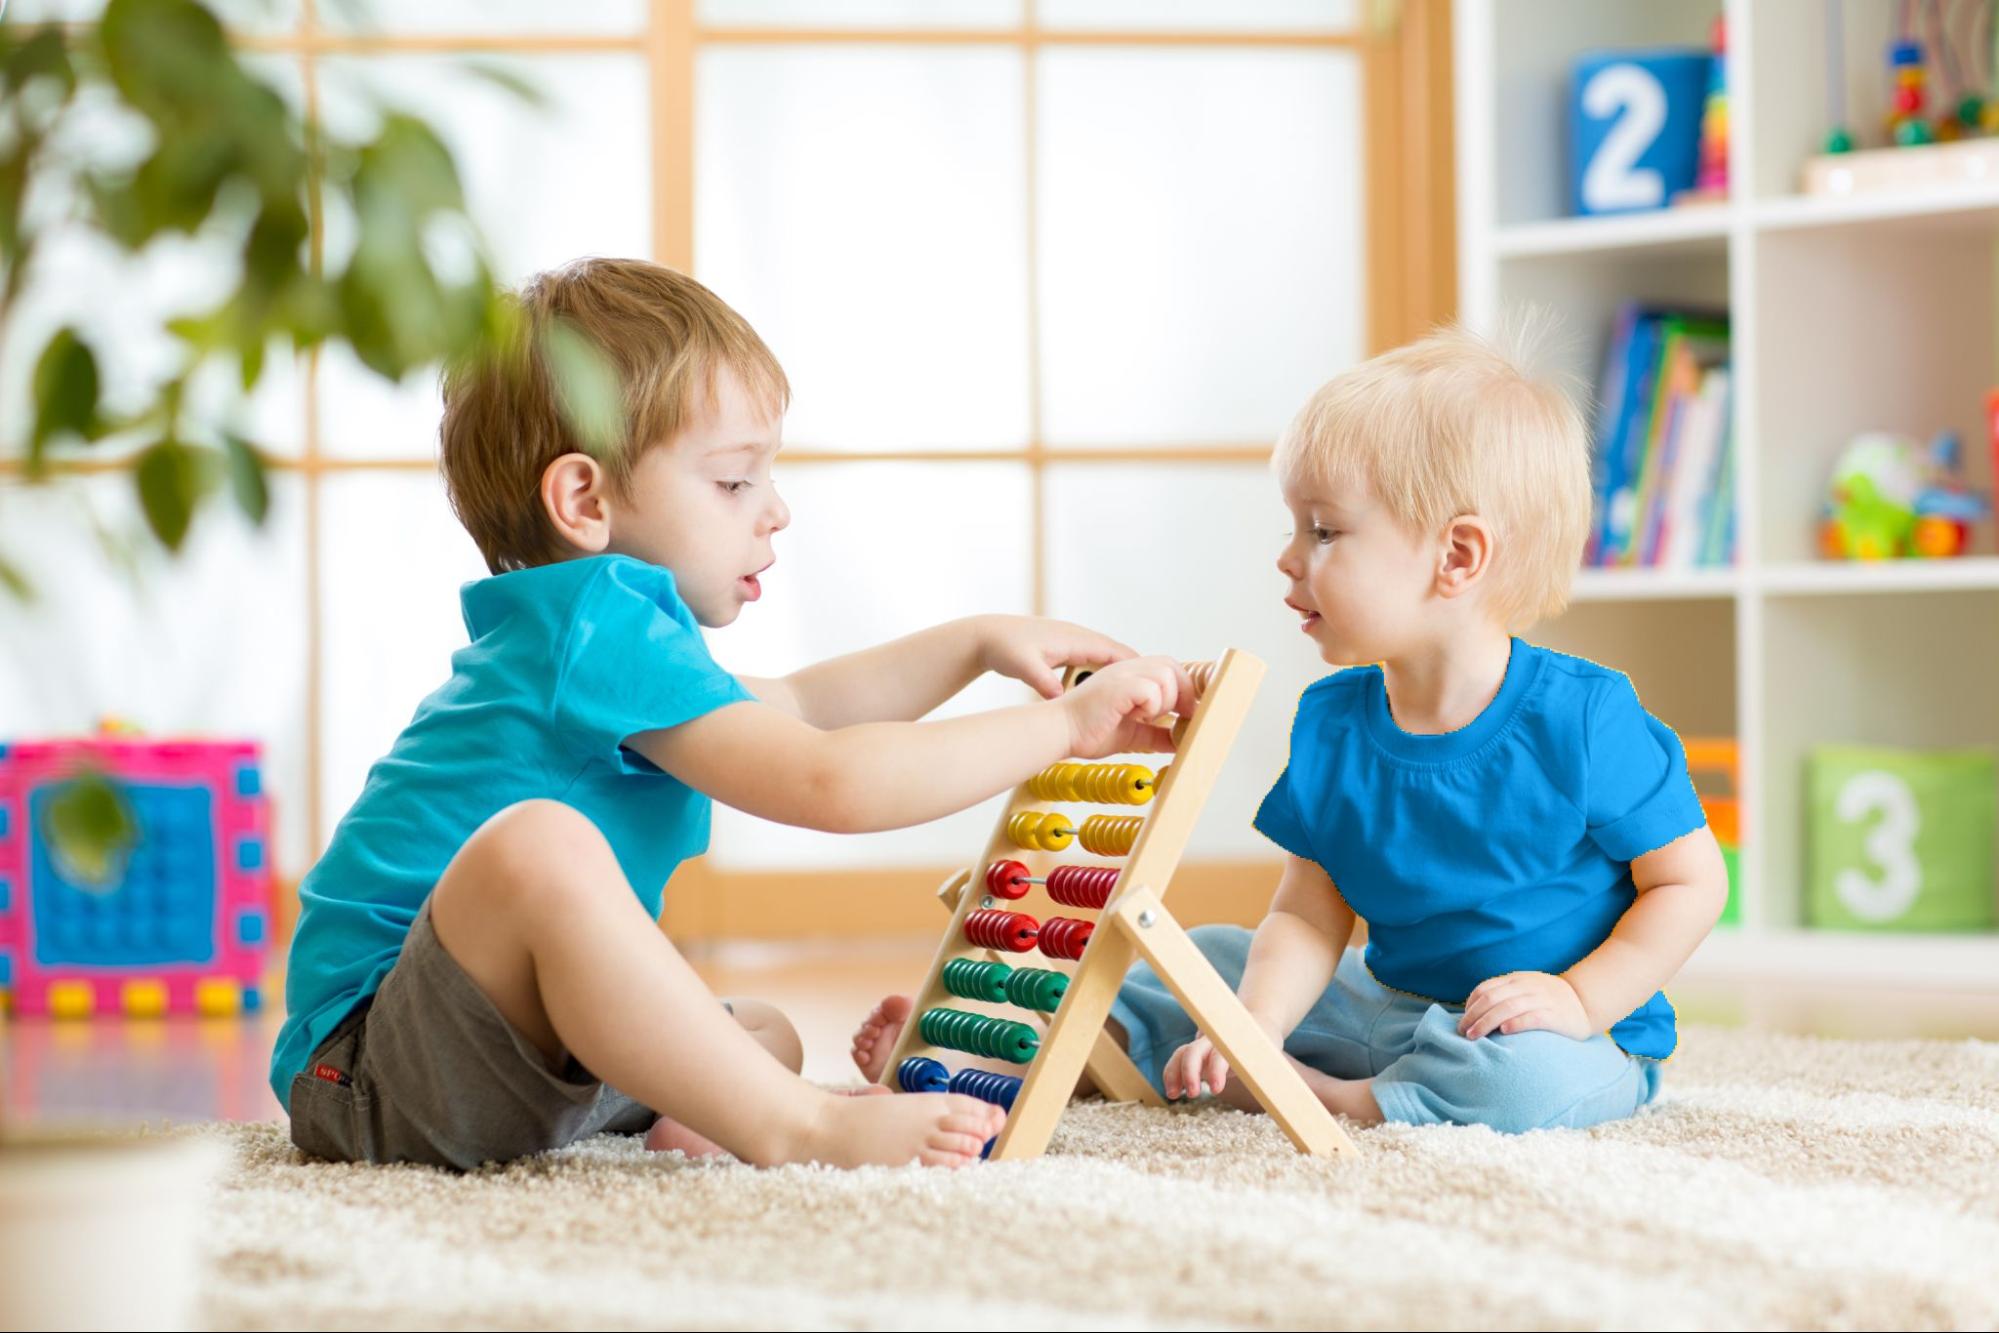 This is an image of two young boys playing with an abacus.